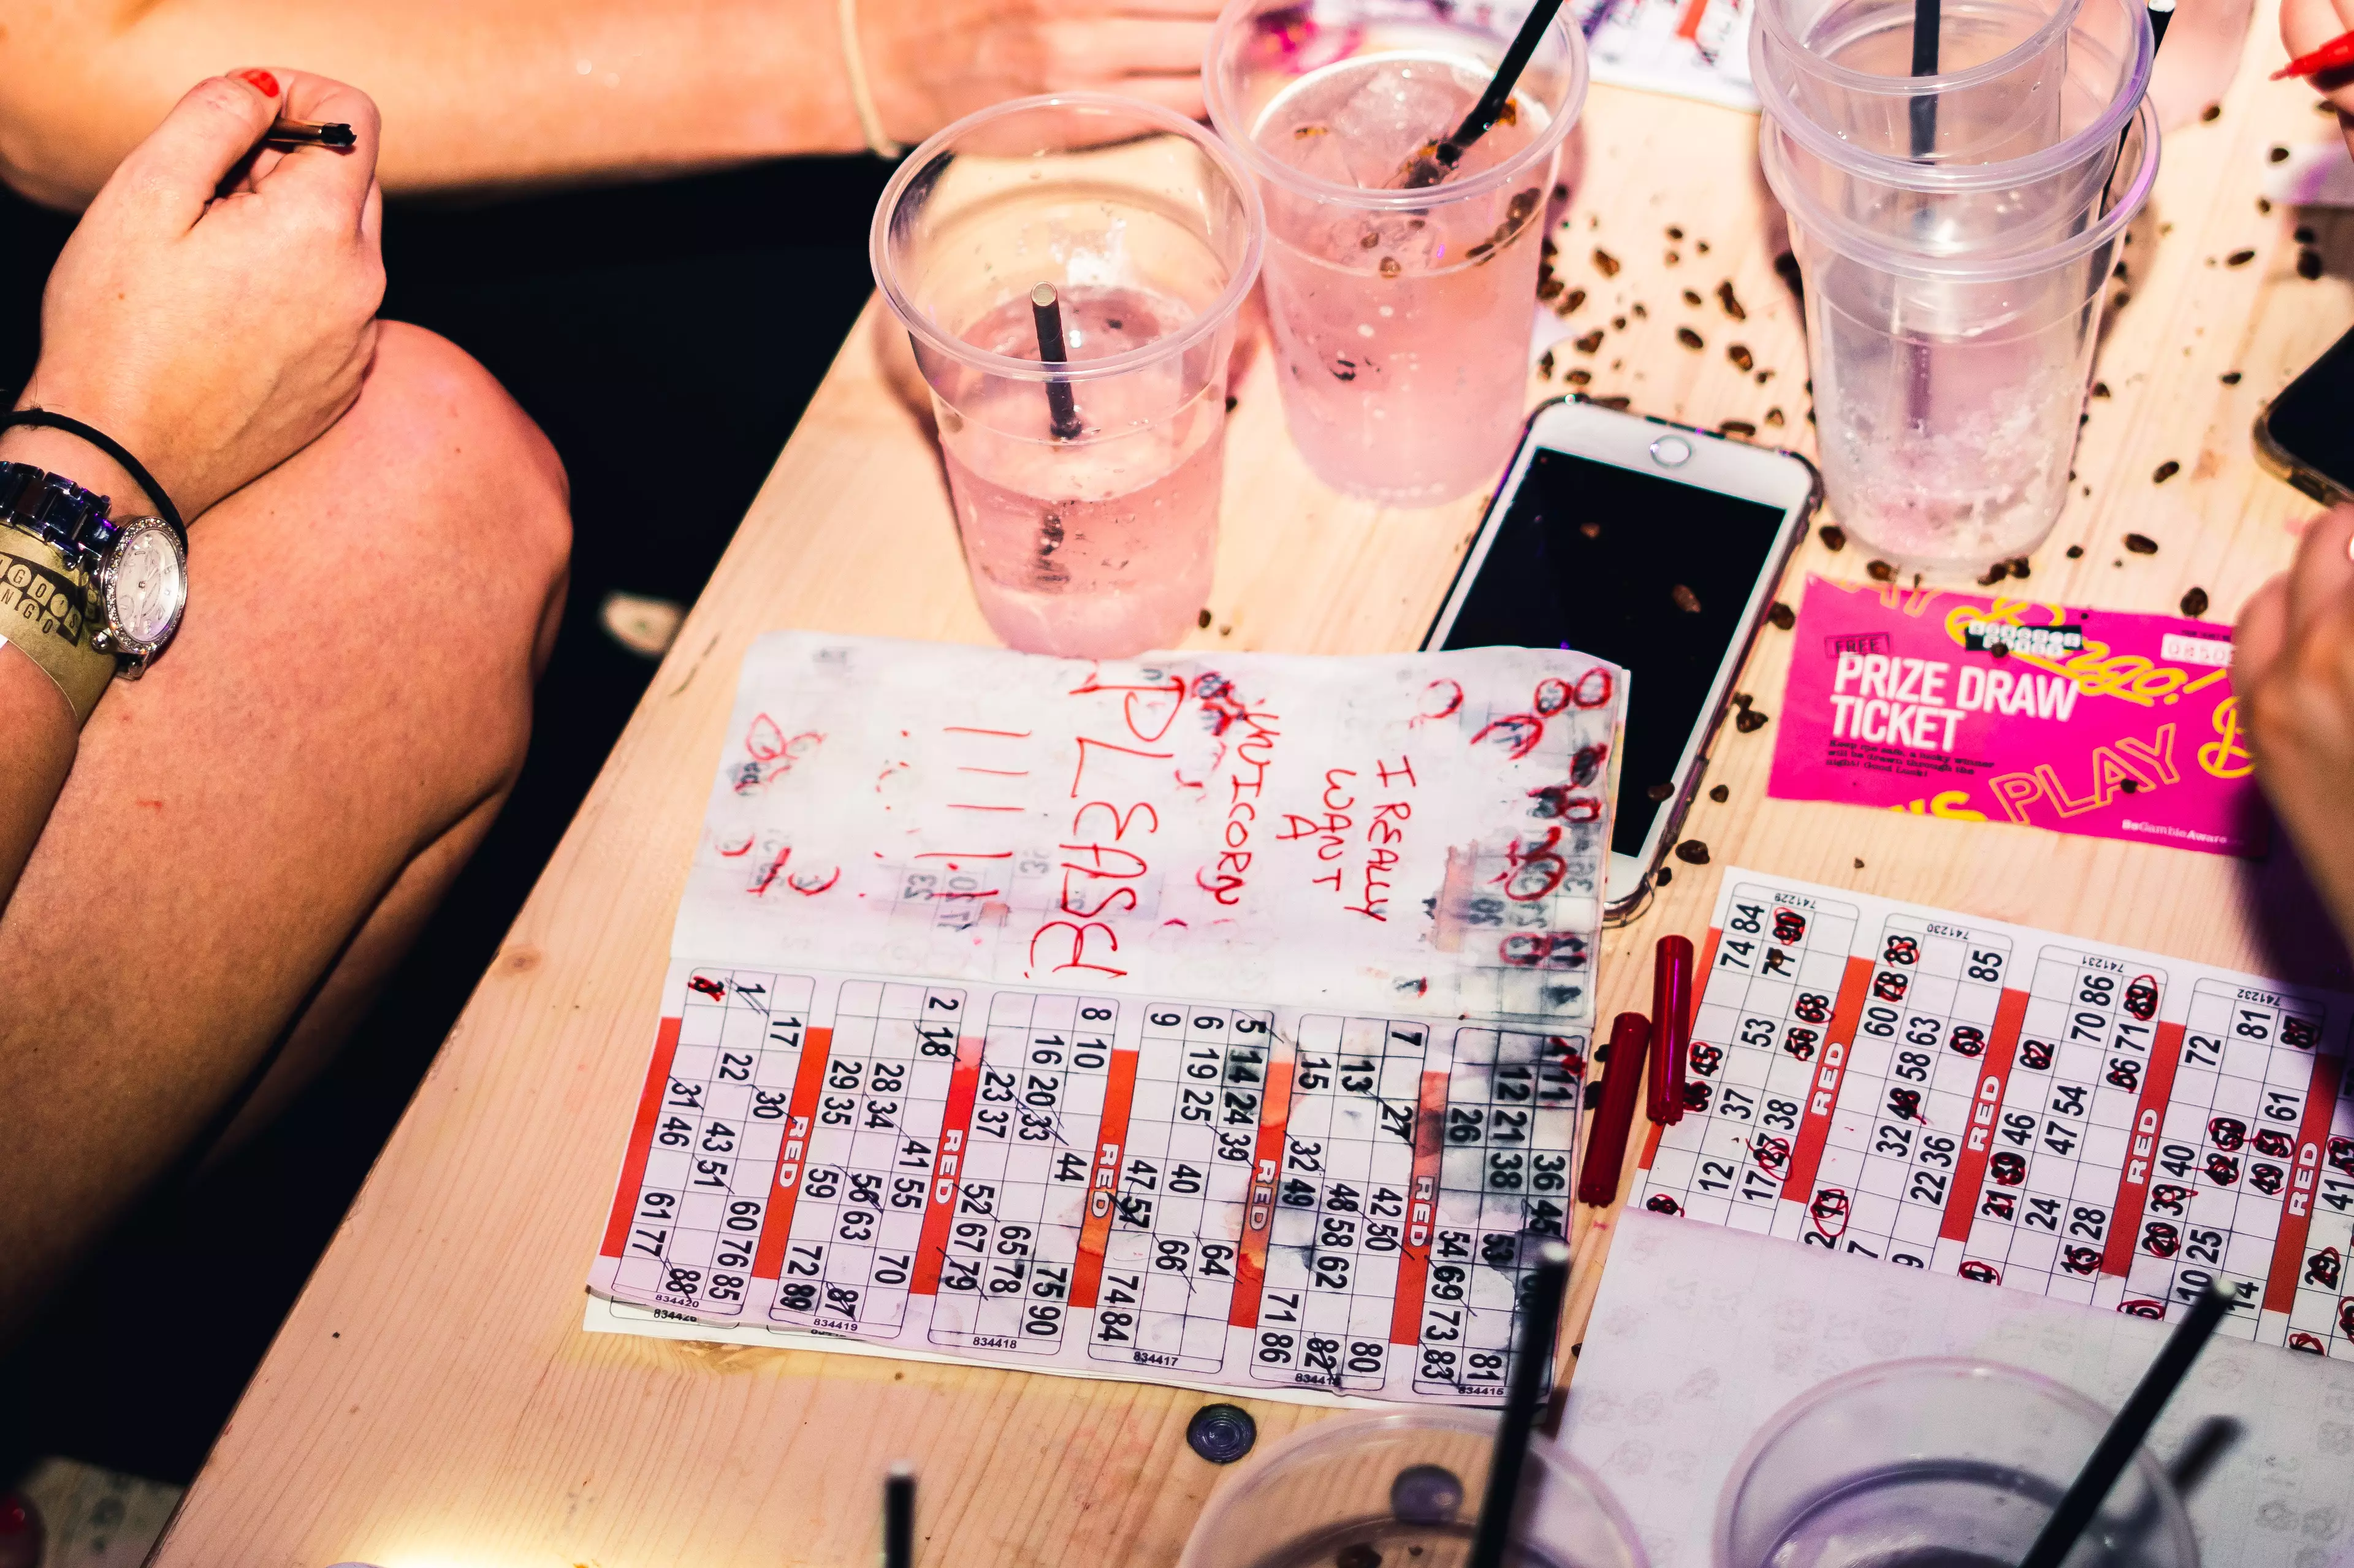 Nothing quite beats a game of good old fashioned bingo...